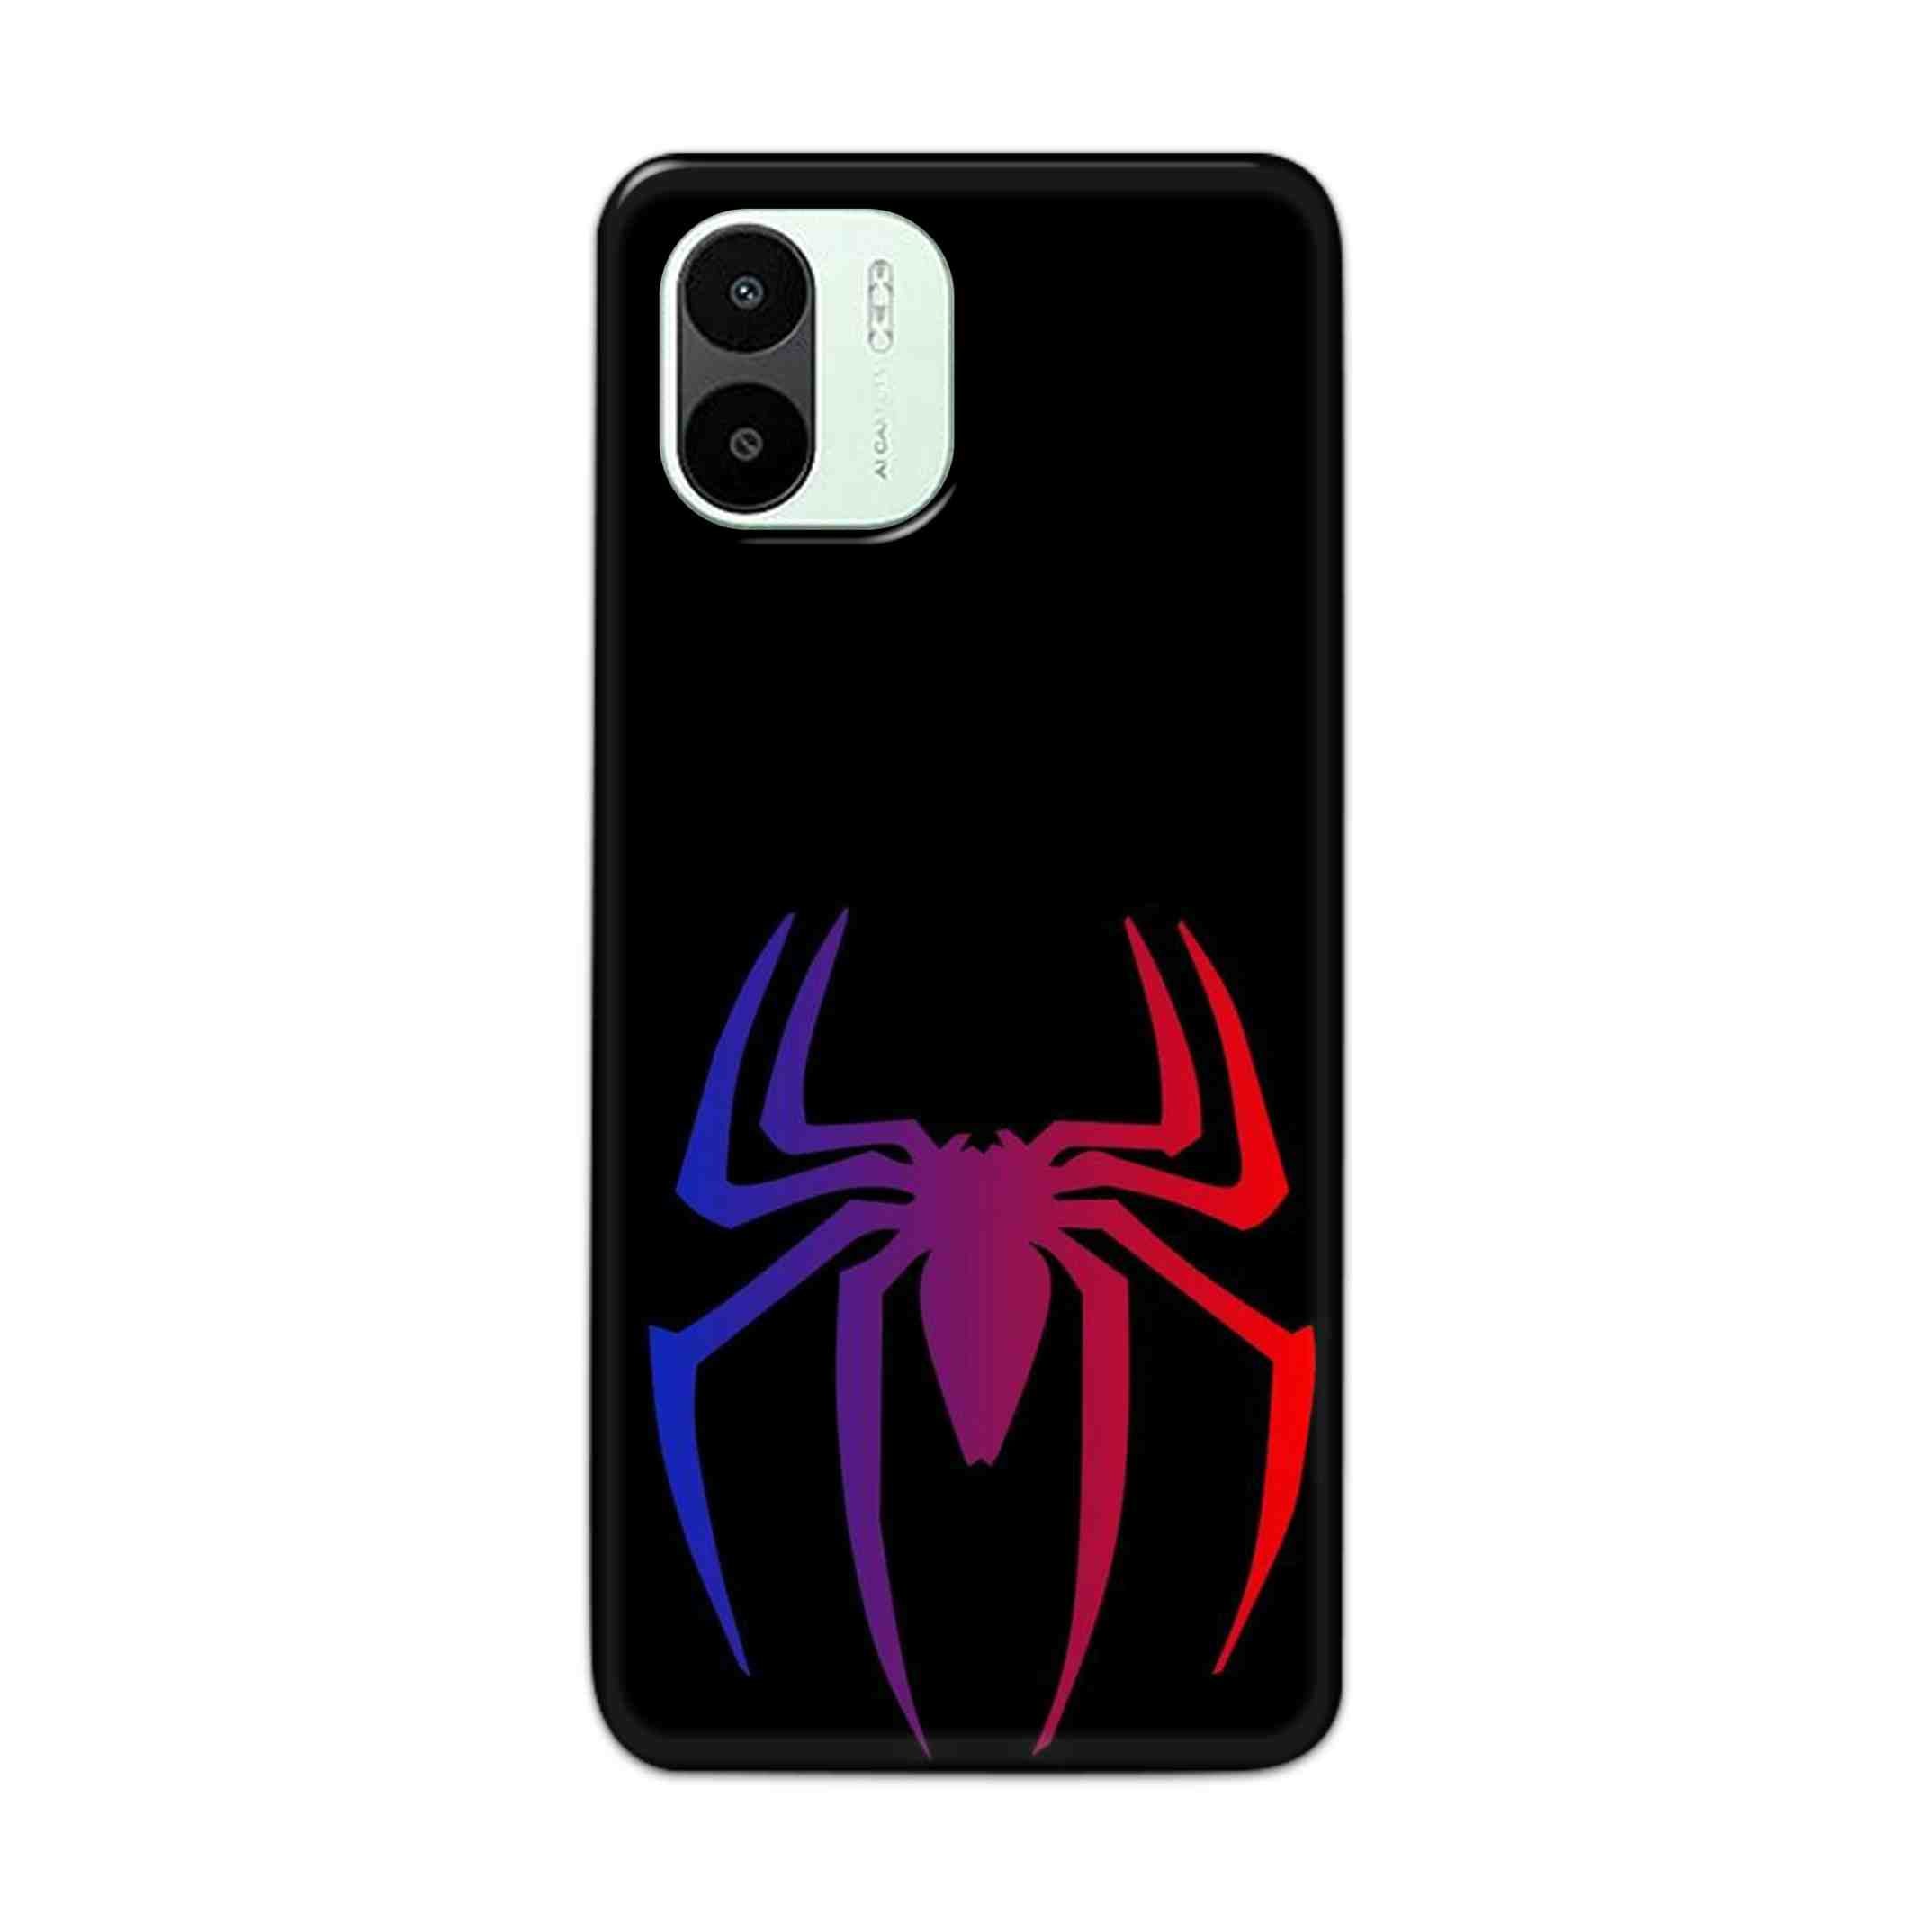 Buy Neon Spiderman Logo Hard Back Mobile Phone Case Cover For Xiaomi Redmi A1 5G Online